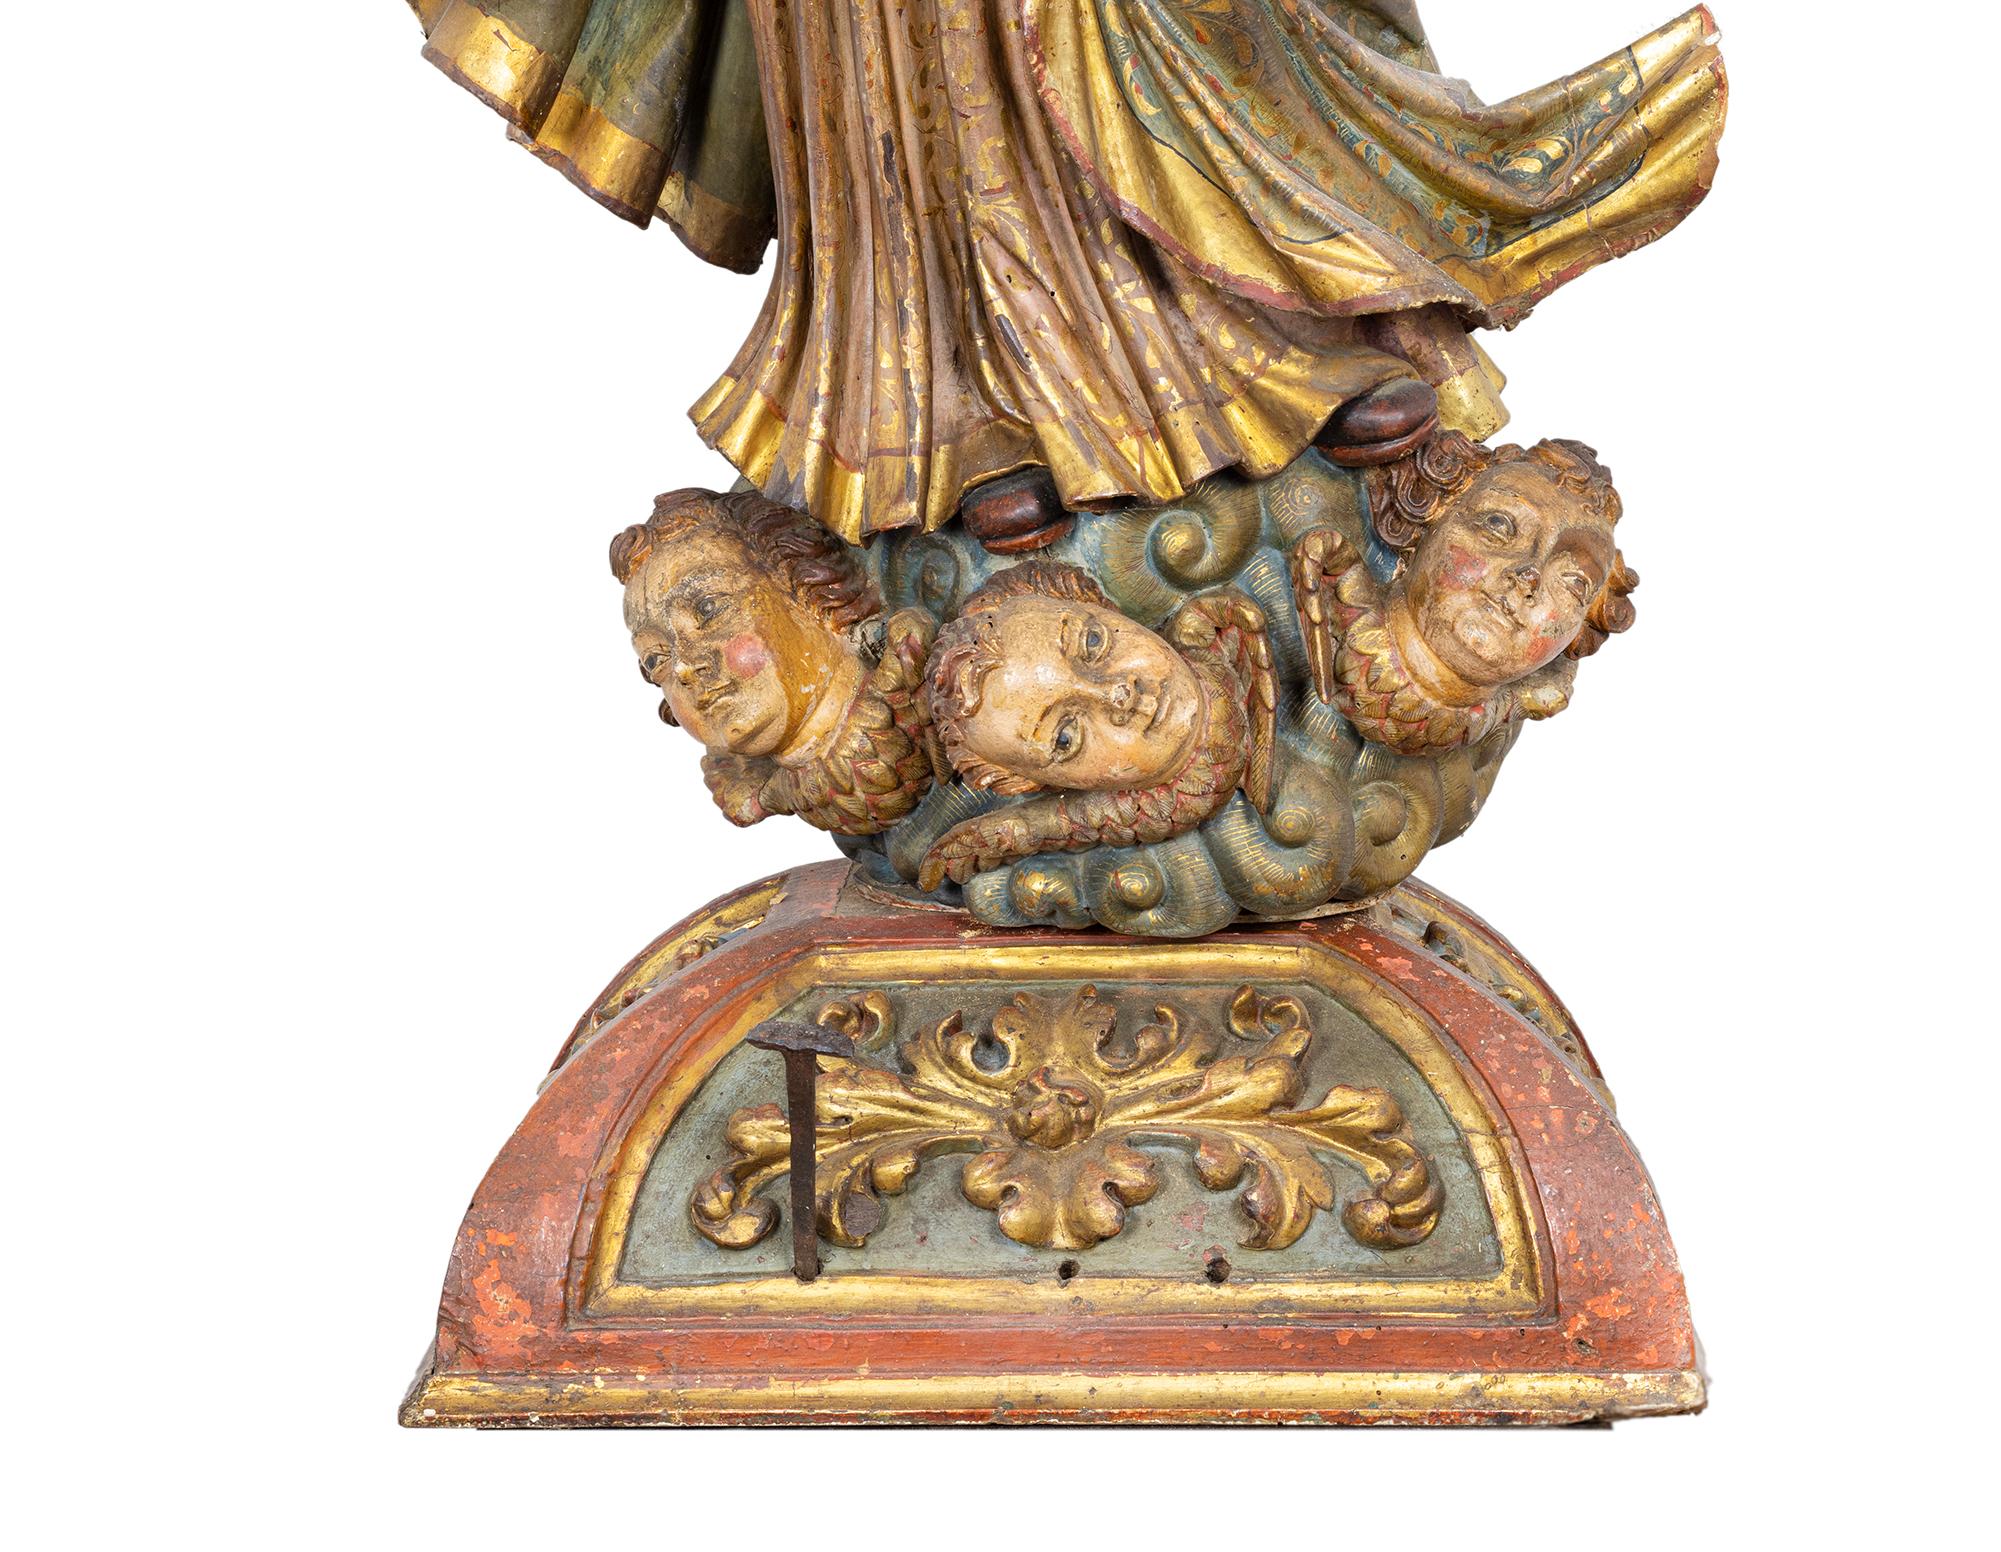 Carved Immaculate Conception Baroque Sculpture, 18th Century  - Religious Art For Sale